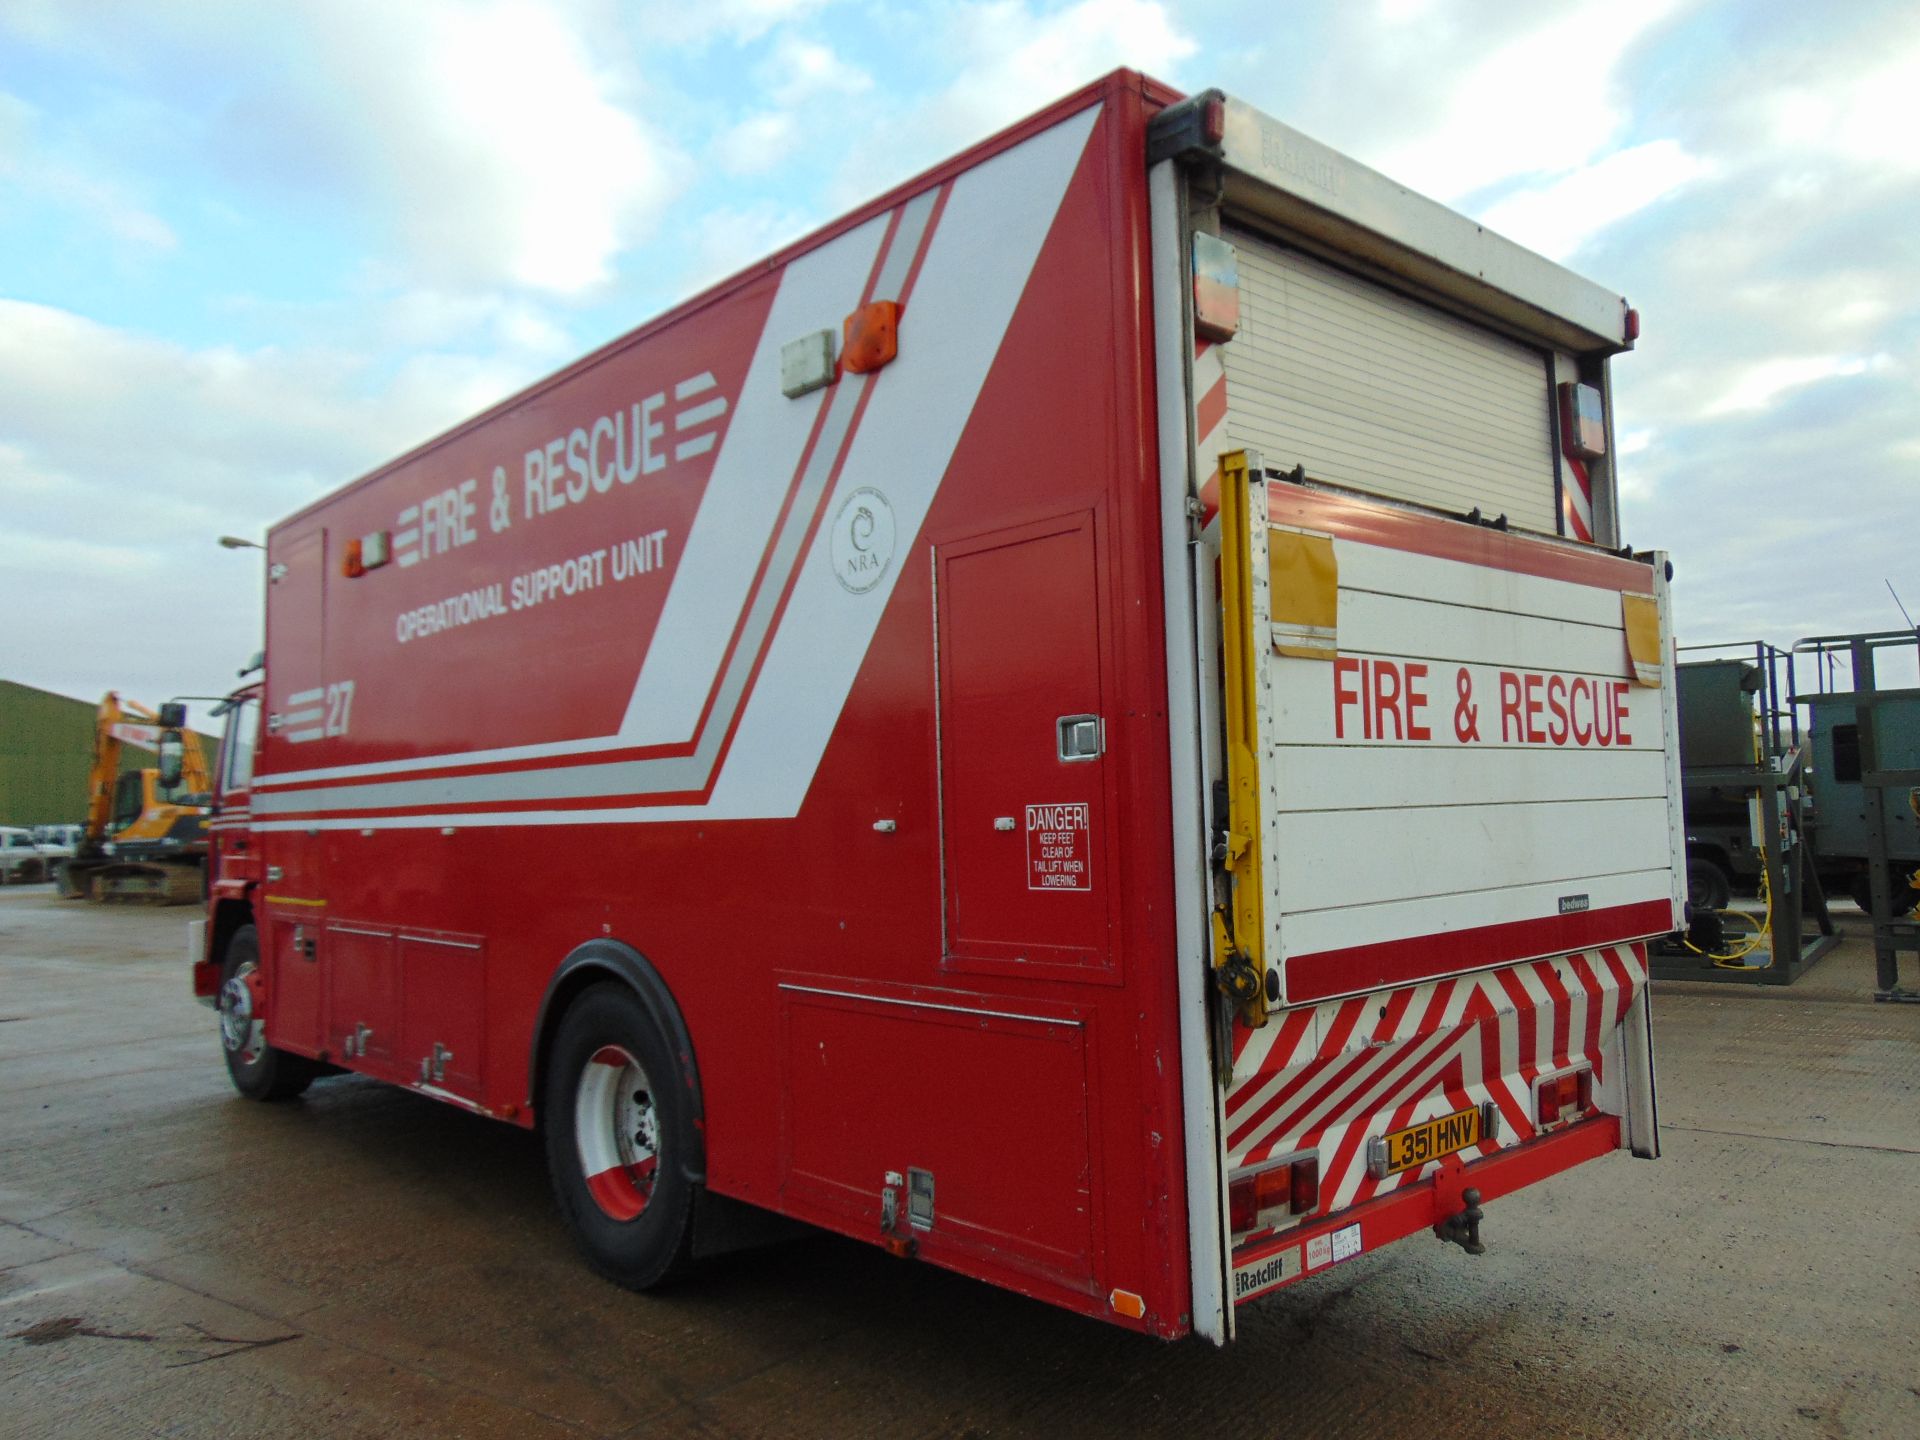 1993 Volvo FL6 18 4 x 2 Incident Response Unit complete with a 1000 Kg Tail Lift - Image 6 of 37